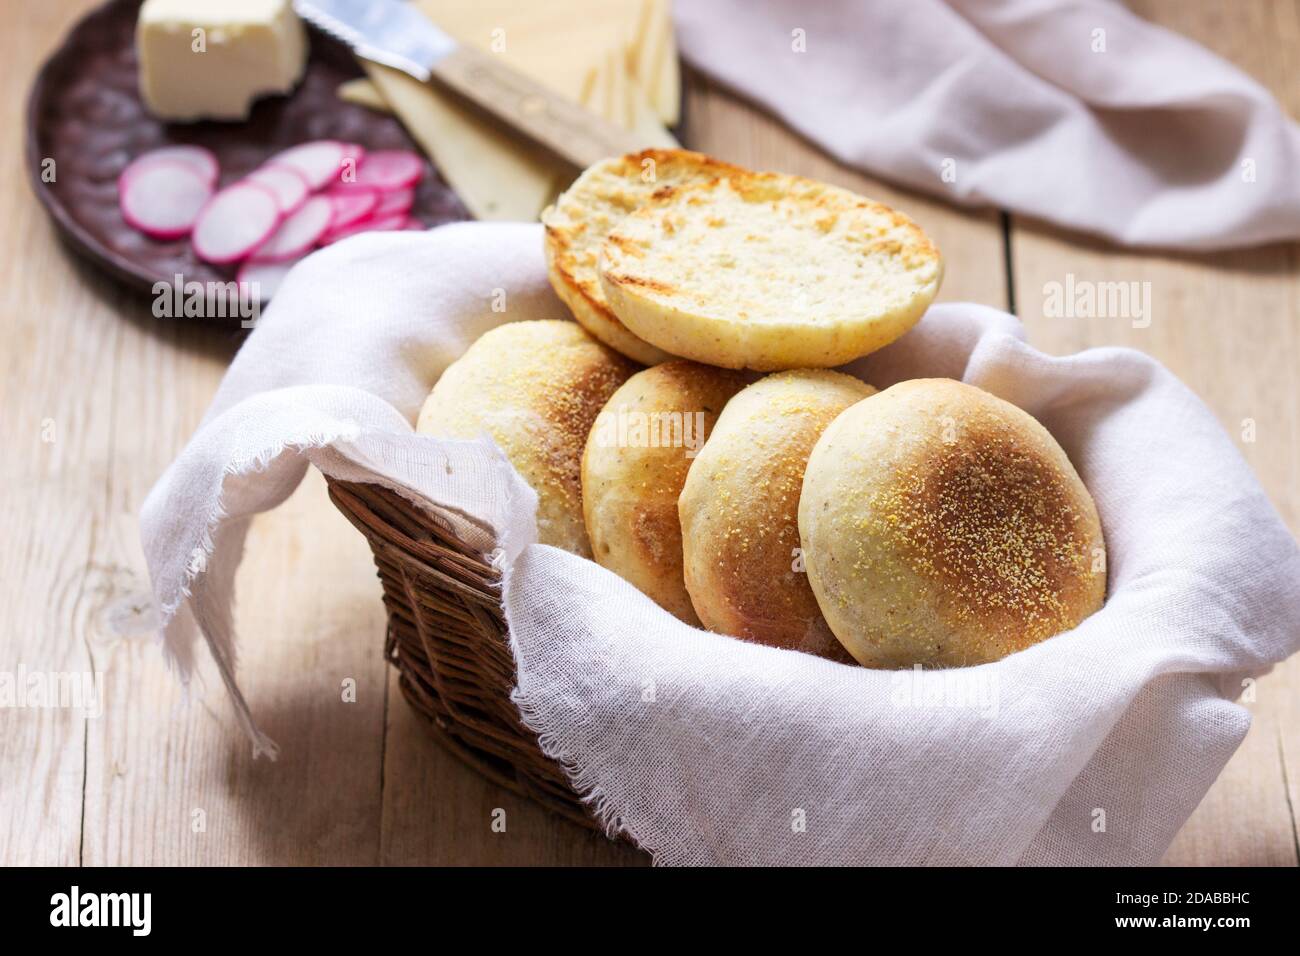 English muffins from whole grain and flax meal, filed with cheese and radish. Rustic style. Stock Photo